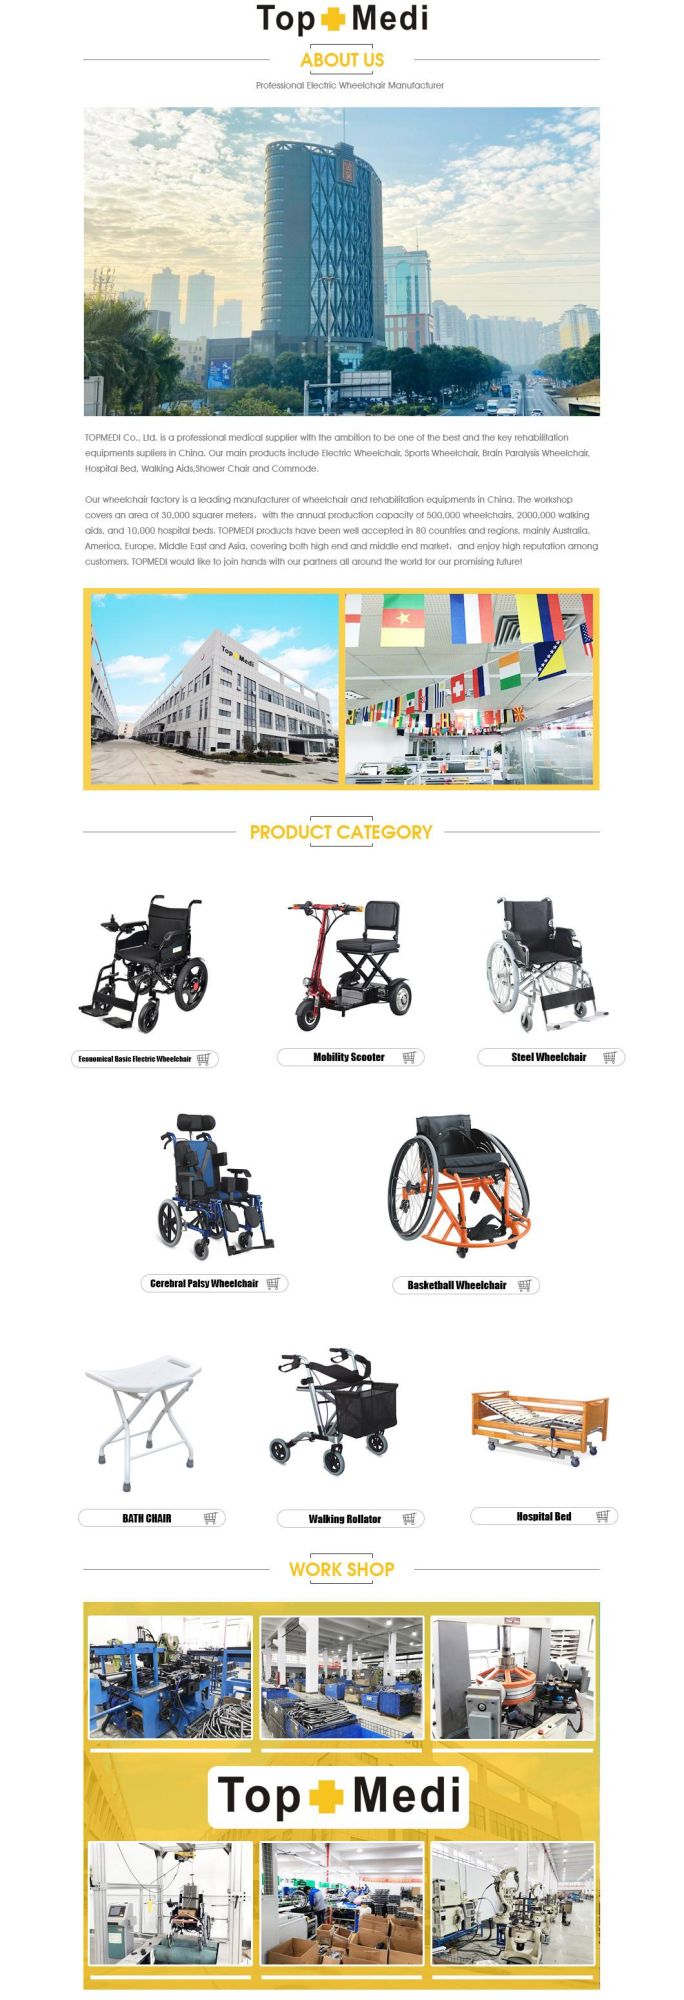 Physical Therapy Equipments Taw874ljpf10 Aluminum Handicapped Wheelchair for Adult